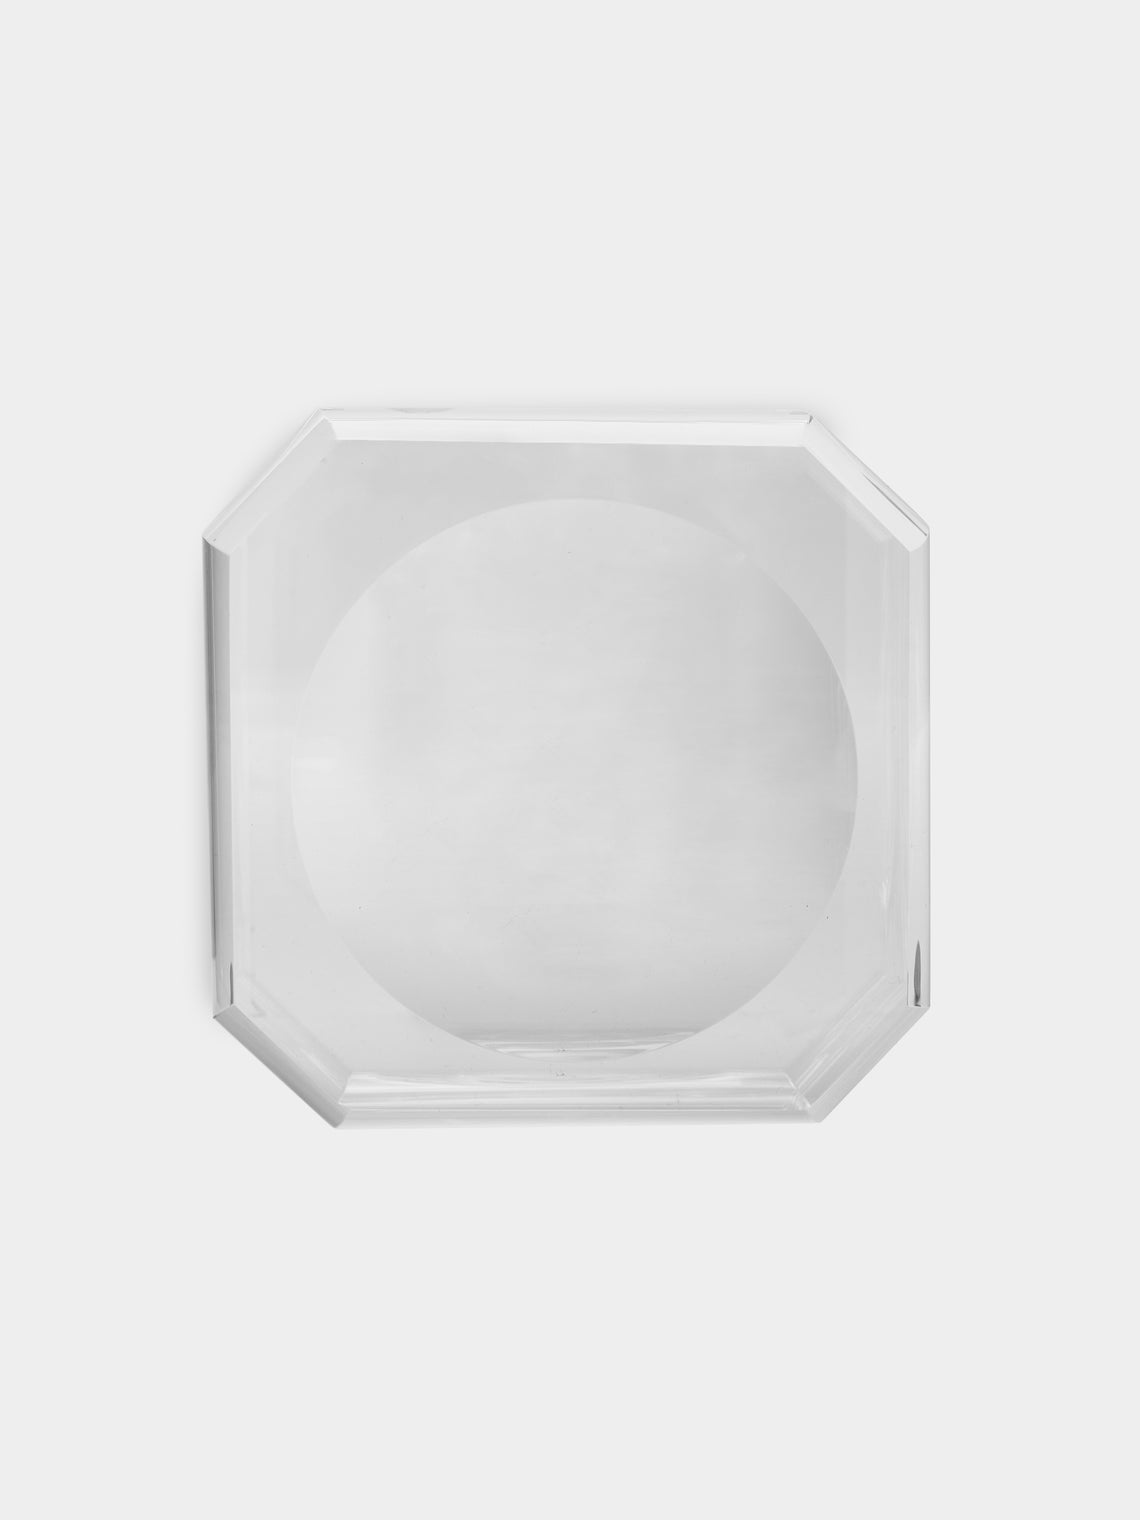 Décor Walther - Cut Crystal Soap Dish -  - ABASK